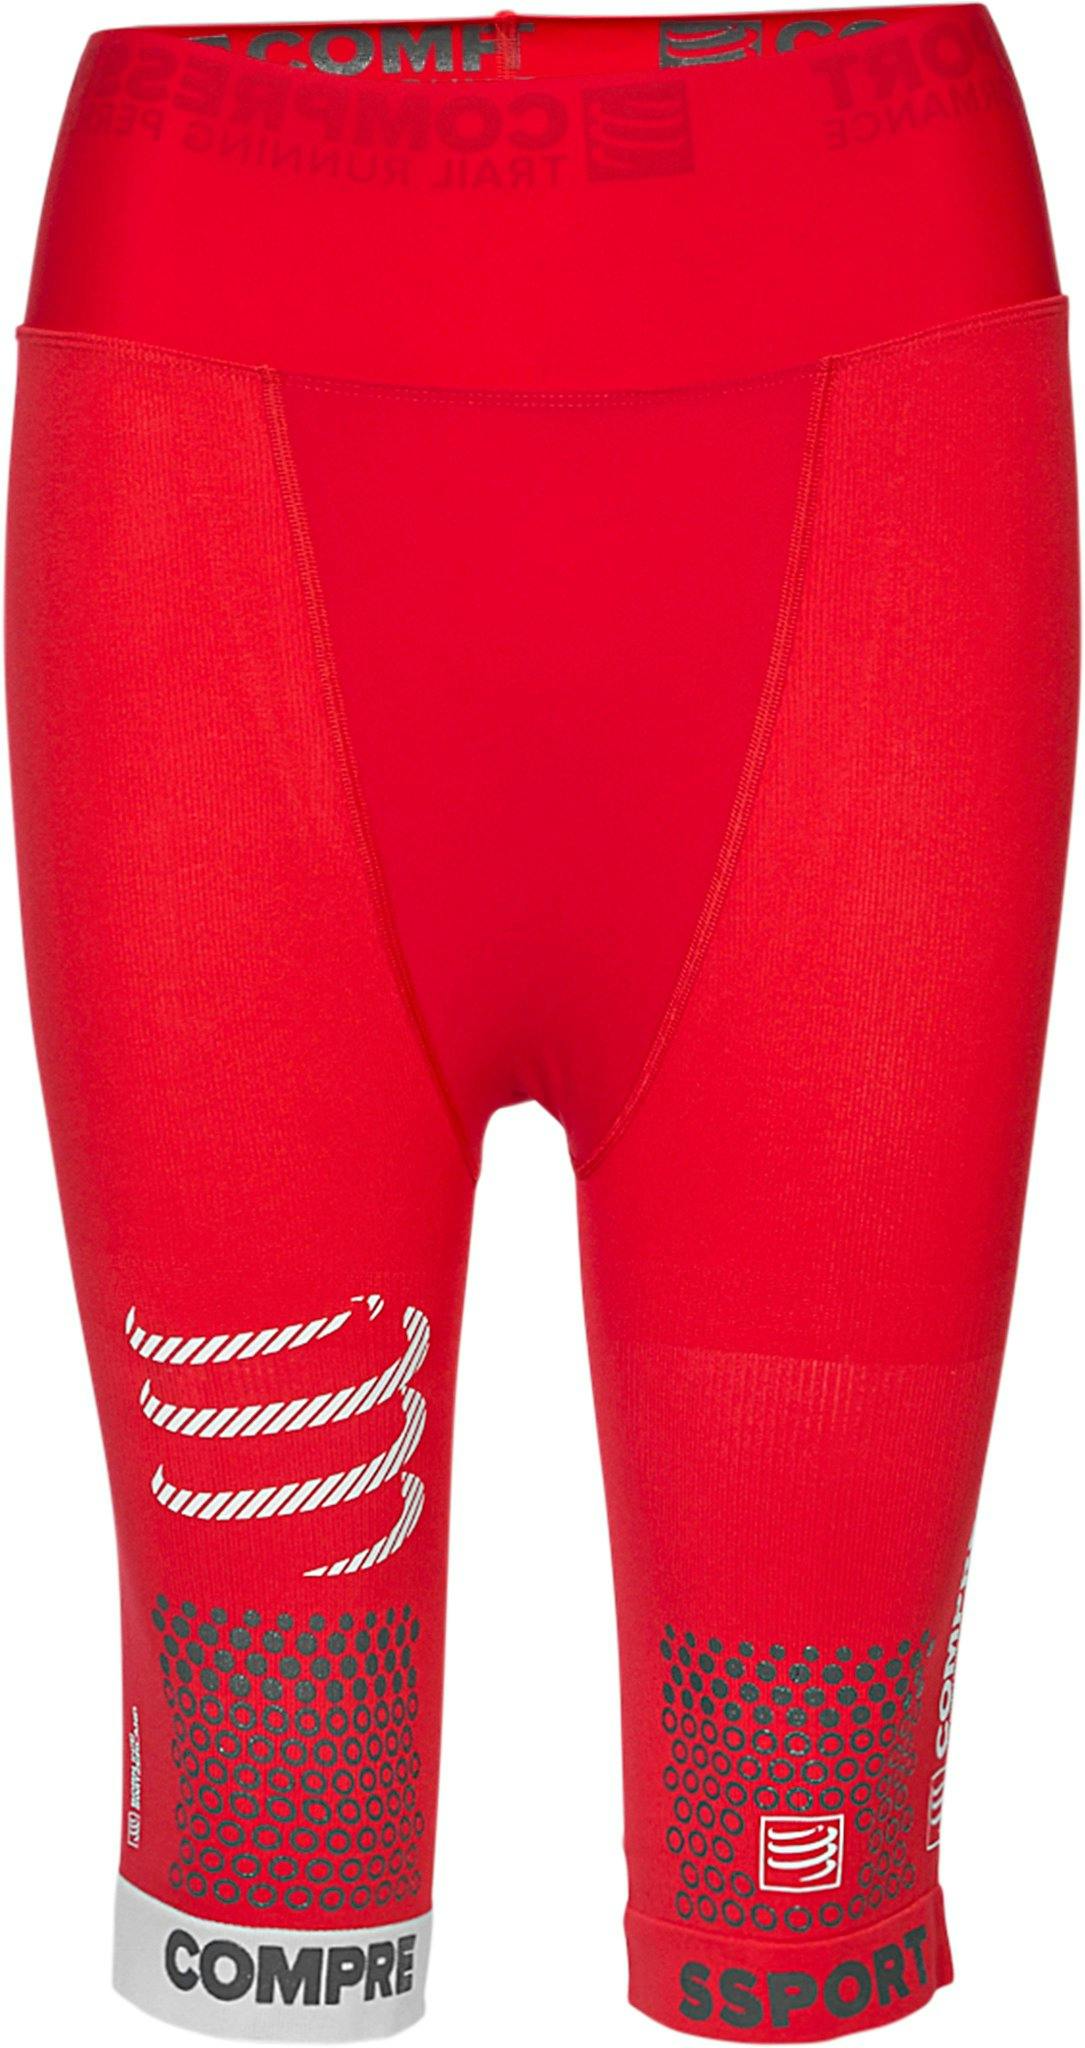 Product image for High Performance Trail Compression Short - Unisex